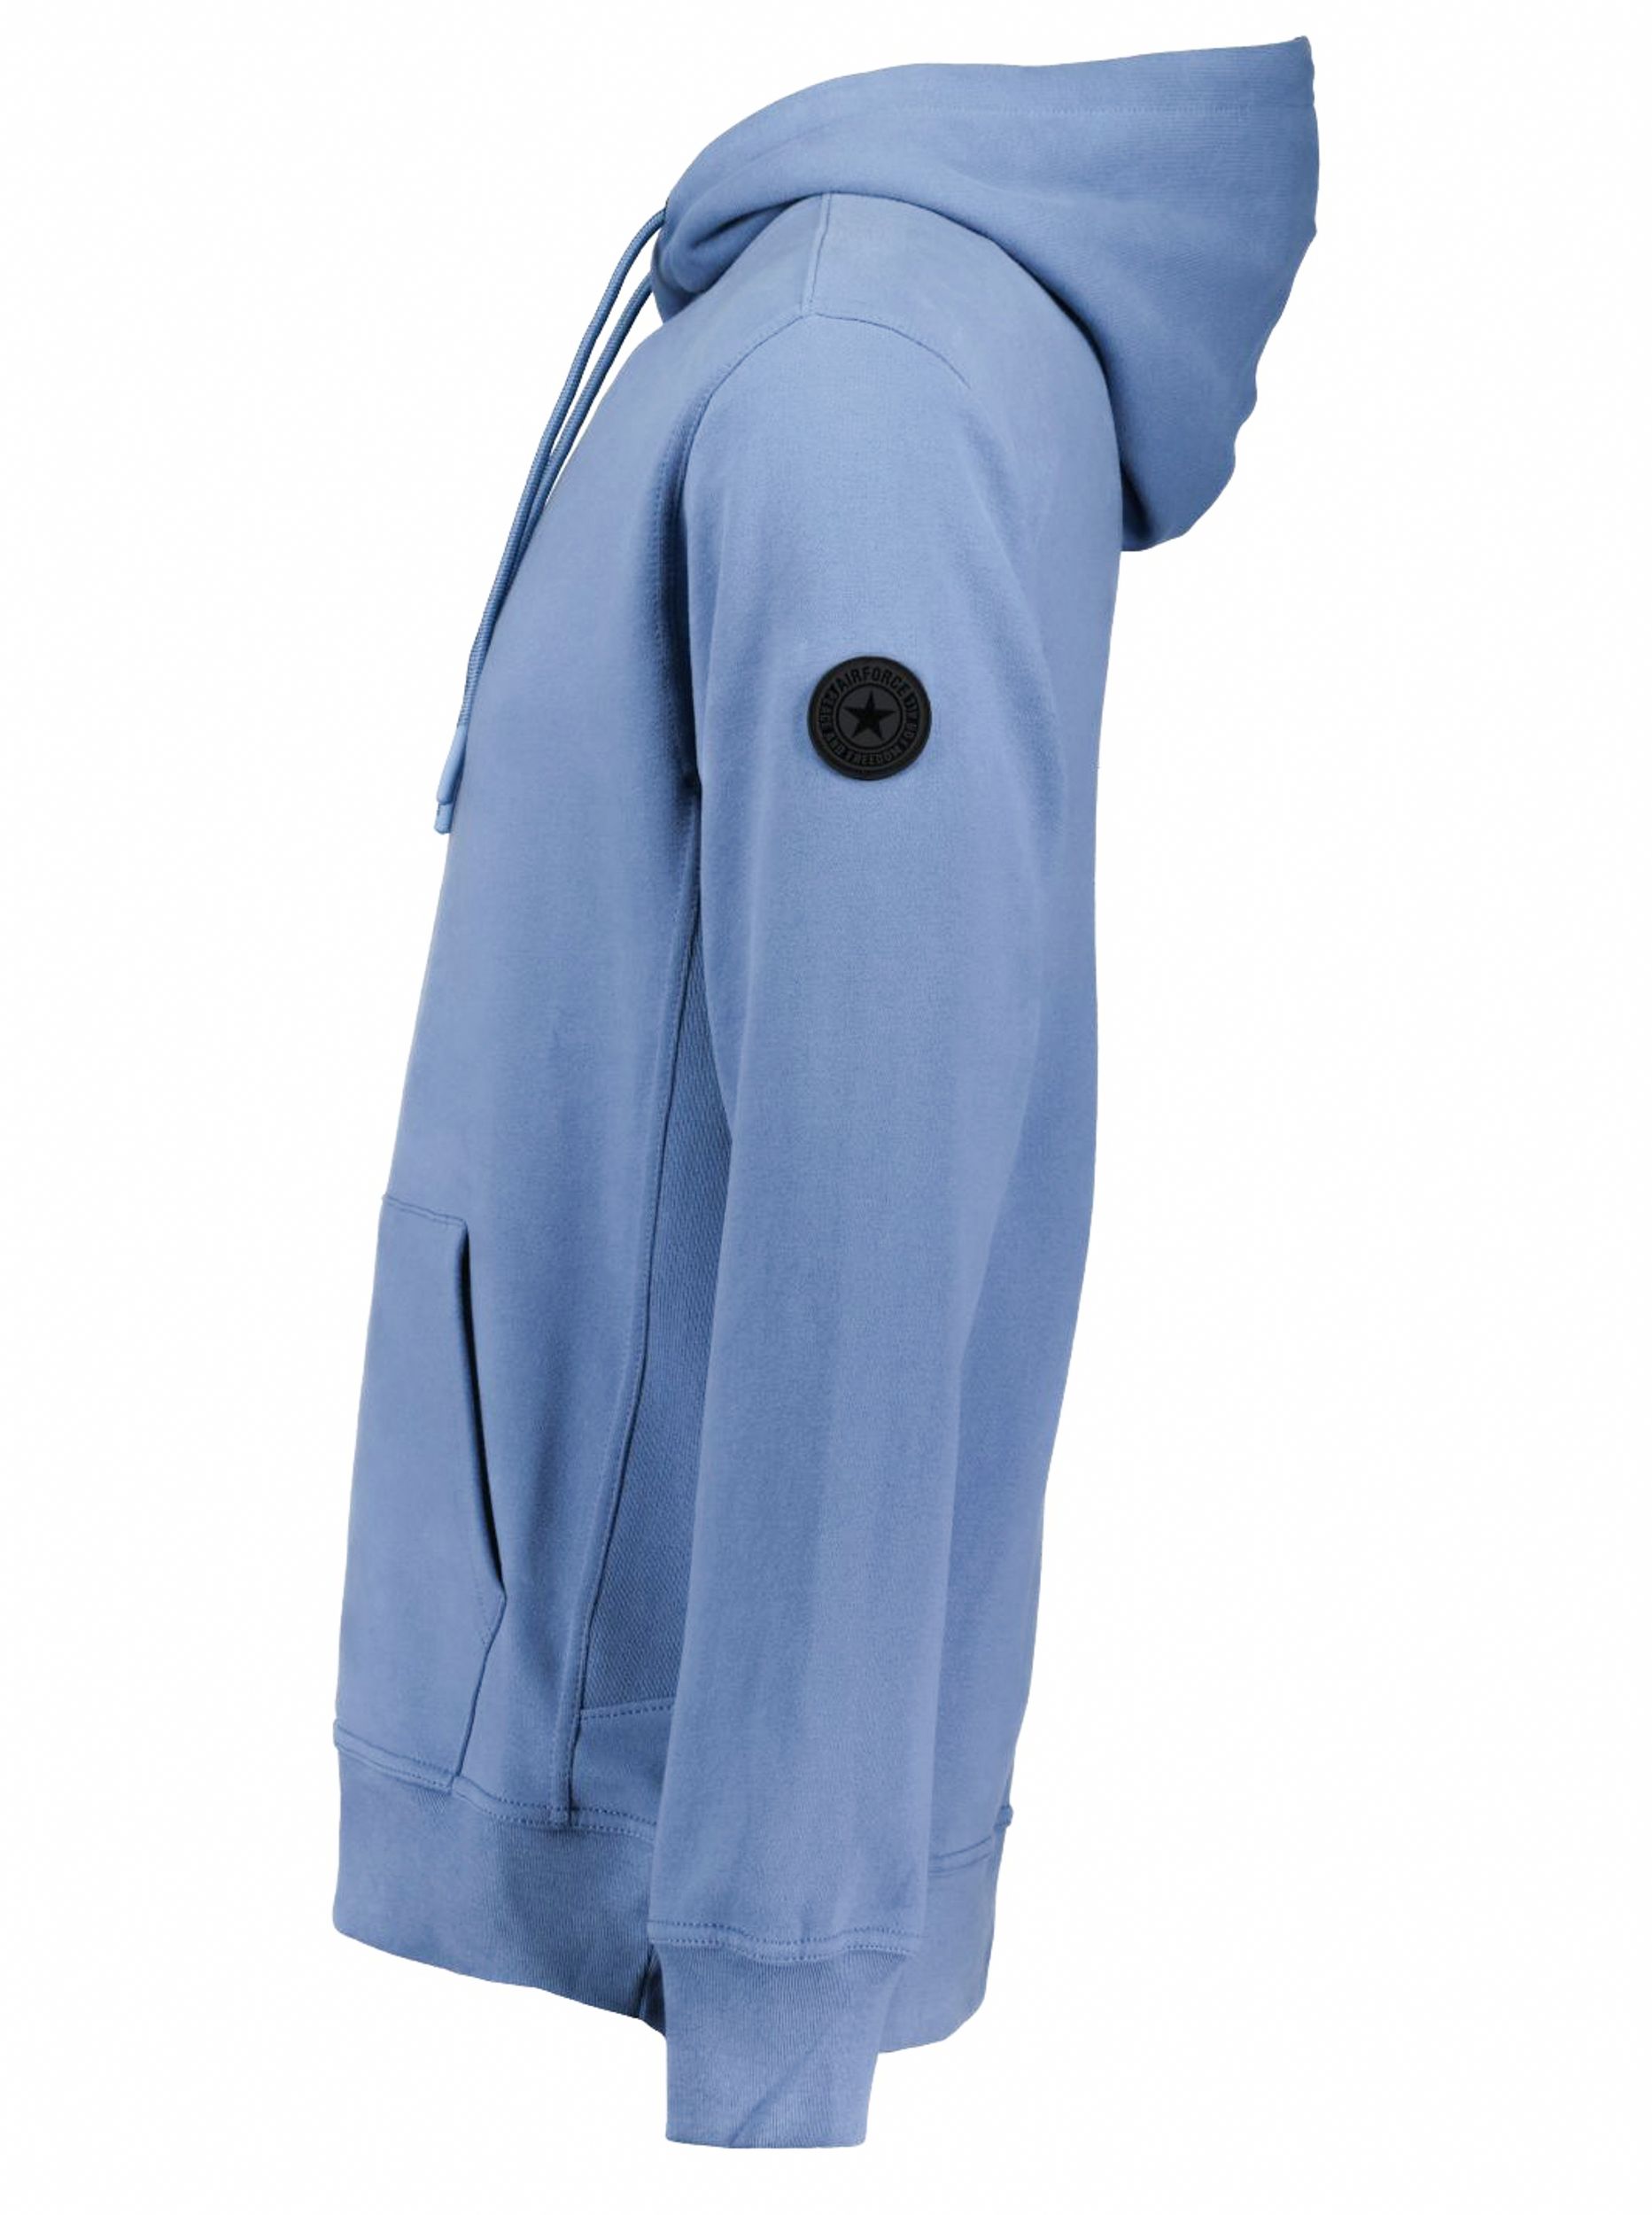 Airforce Hoodie Donker blauw 079398-001-L